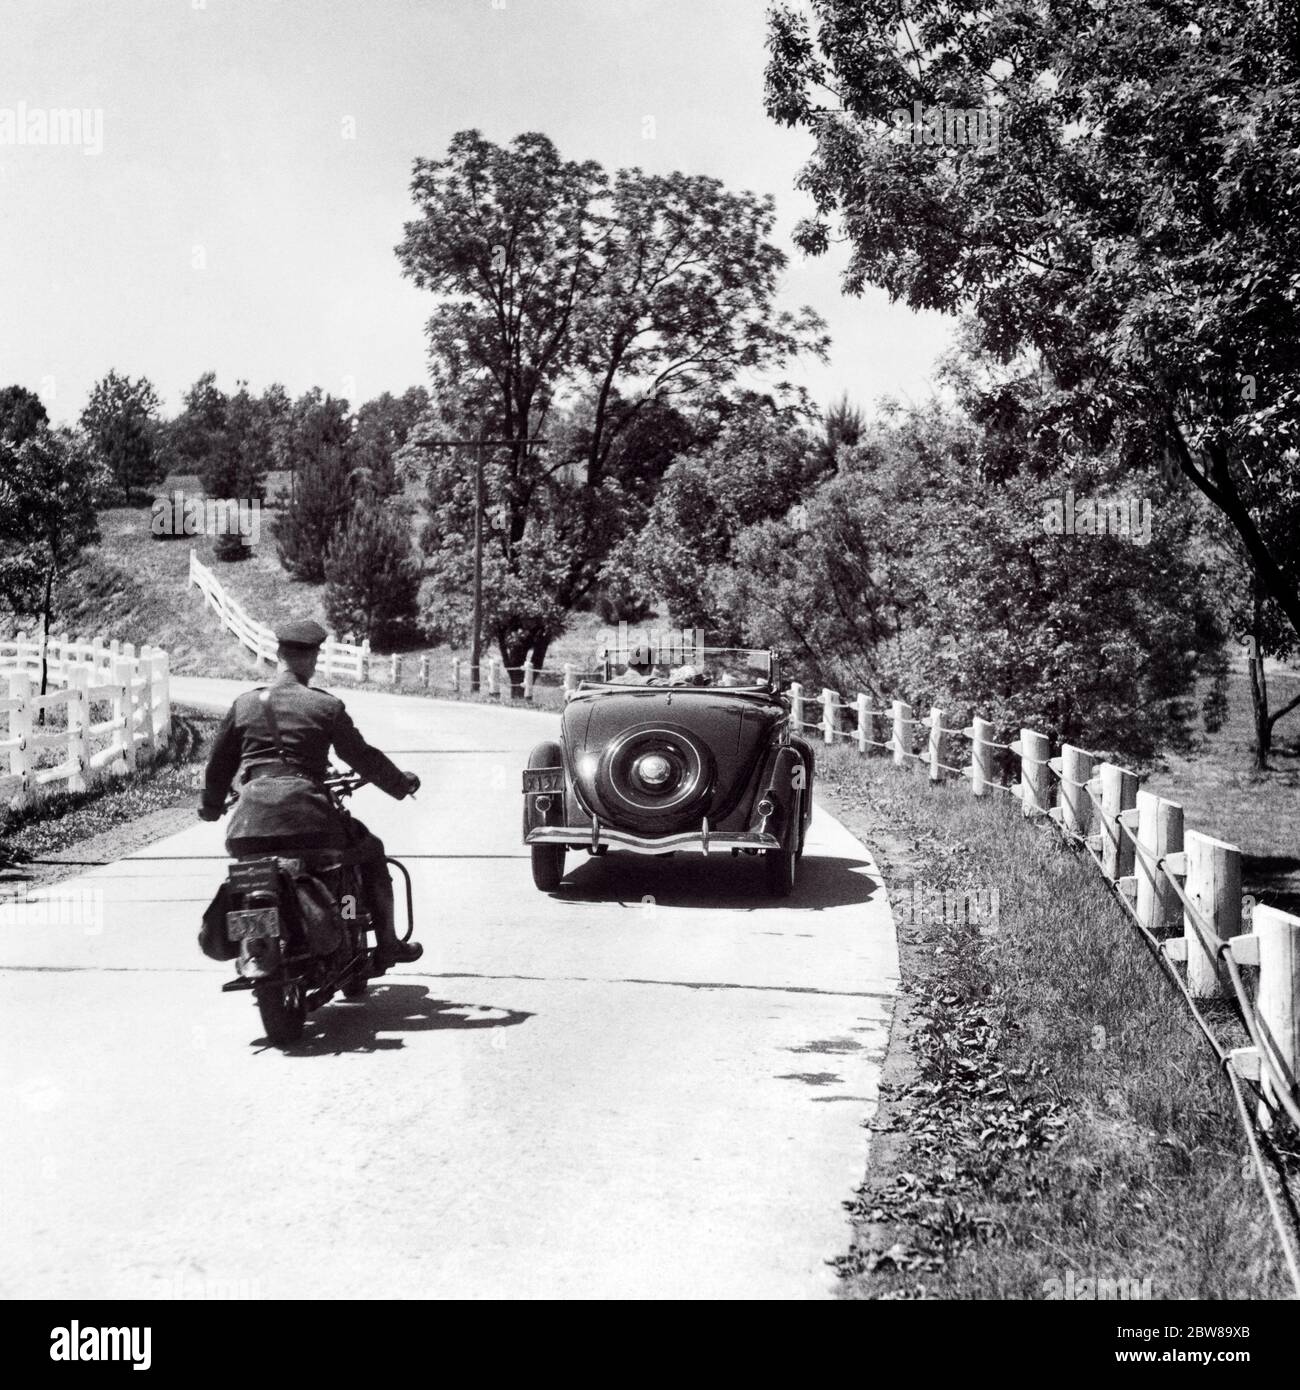 1930s 1940s MAN HIGHWAY PATROL POLICE OFFICER ON MOTORCYCLE PURSUING CONVERTIBLE CAR WITH COUPLE TWO PASSENGERS ON COUNTRY ROAD - m4762 HAR001 HARS POLICEMAN VEHICLE SAFETY LIFESTYLE SPEED FEMALES PASSENGERS RURAL COPY SPACE HALF-LENGTH HIGHWAY LADIES PERSONS AUTOMOBILE MALES RISK OFFICER TRANSPORTATION B&W COP PROTECT AND SERVE HIGH ANGLE ADVENTURE AUTOS EXCITEMENT REAR VIEW ON AUTHORITY OCCUPATIONS SPEEDING UNIFORMS PATROL CONCEPTUAL FROM BEHIND AUTOMOBILES VEHICLES OFFICERS POLICEMEN PURSUING BACK VIEW CHASING COOPERATION COPS TOGETHERNESS BADGE BADGES BLACK AND WHITE HAR001 OLD FASHIONED Stock Photo